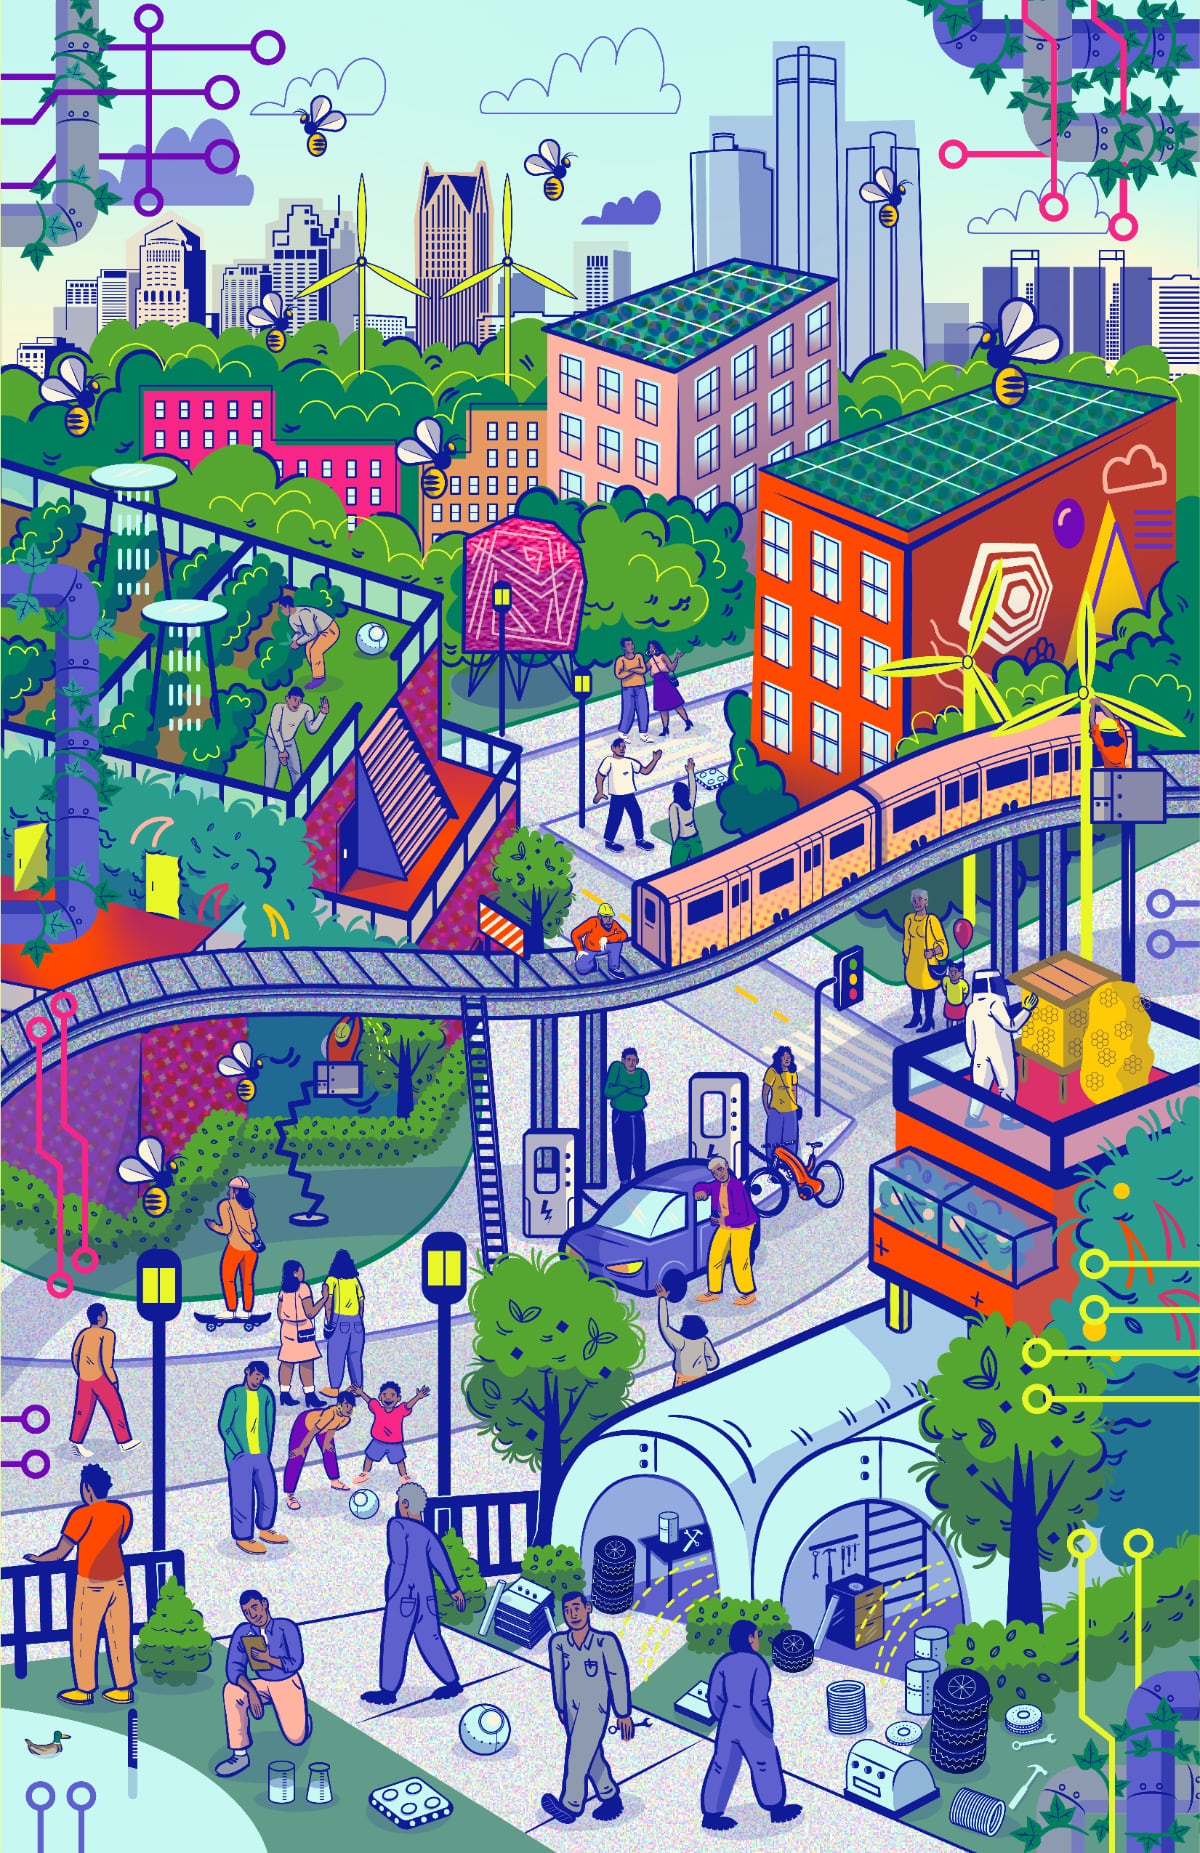 Illustration by Justine Allenette Ross for the Taubman College of Architecture and Urban Planning